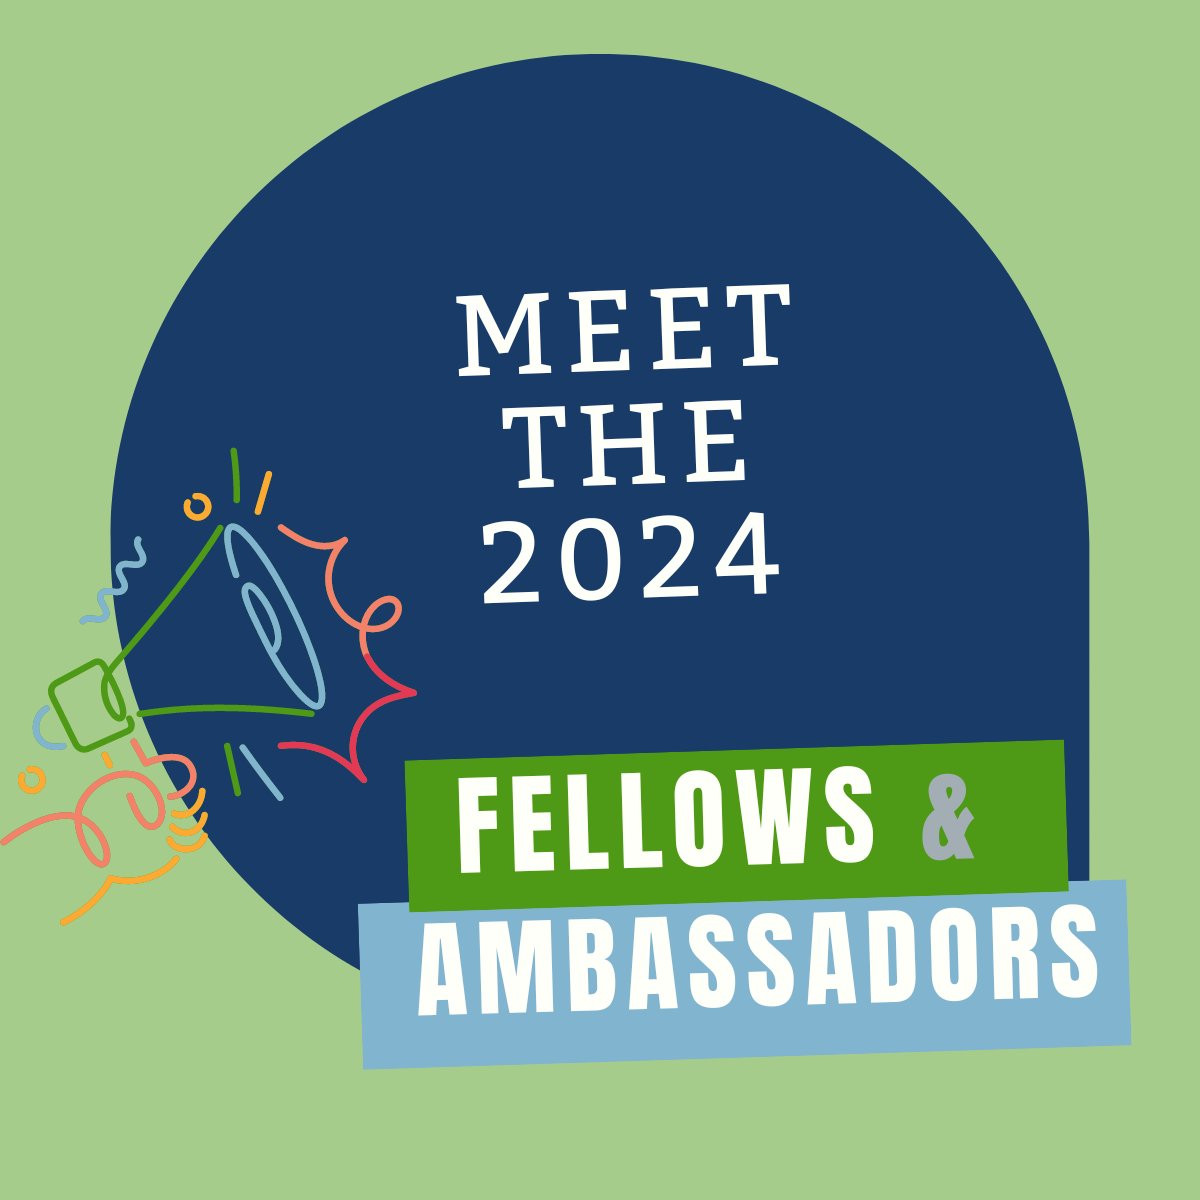 Get ready to meet our newest cohort of #energy system influencers & #innovators from across Alberta and beyond! Introducing the 2024 Fellows and Ambassadors. energyfutureslab.com/fellows-2/ #EnergySystem #AlbertaEnergy #SustainabilityLeaders #EnergyInnovation #EnergyTransition